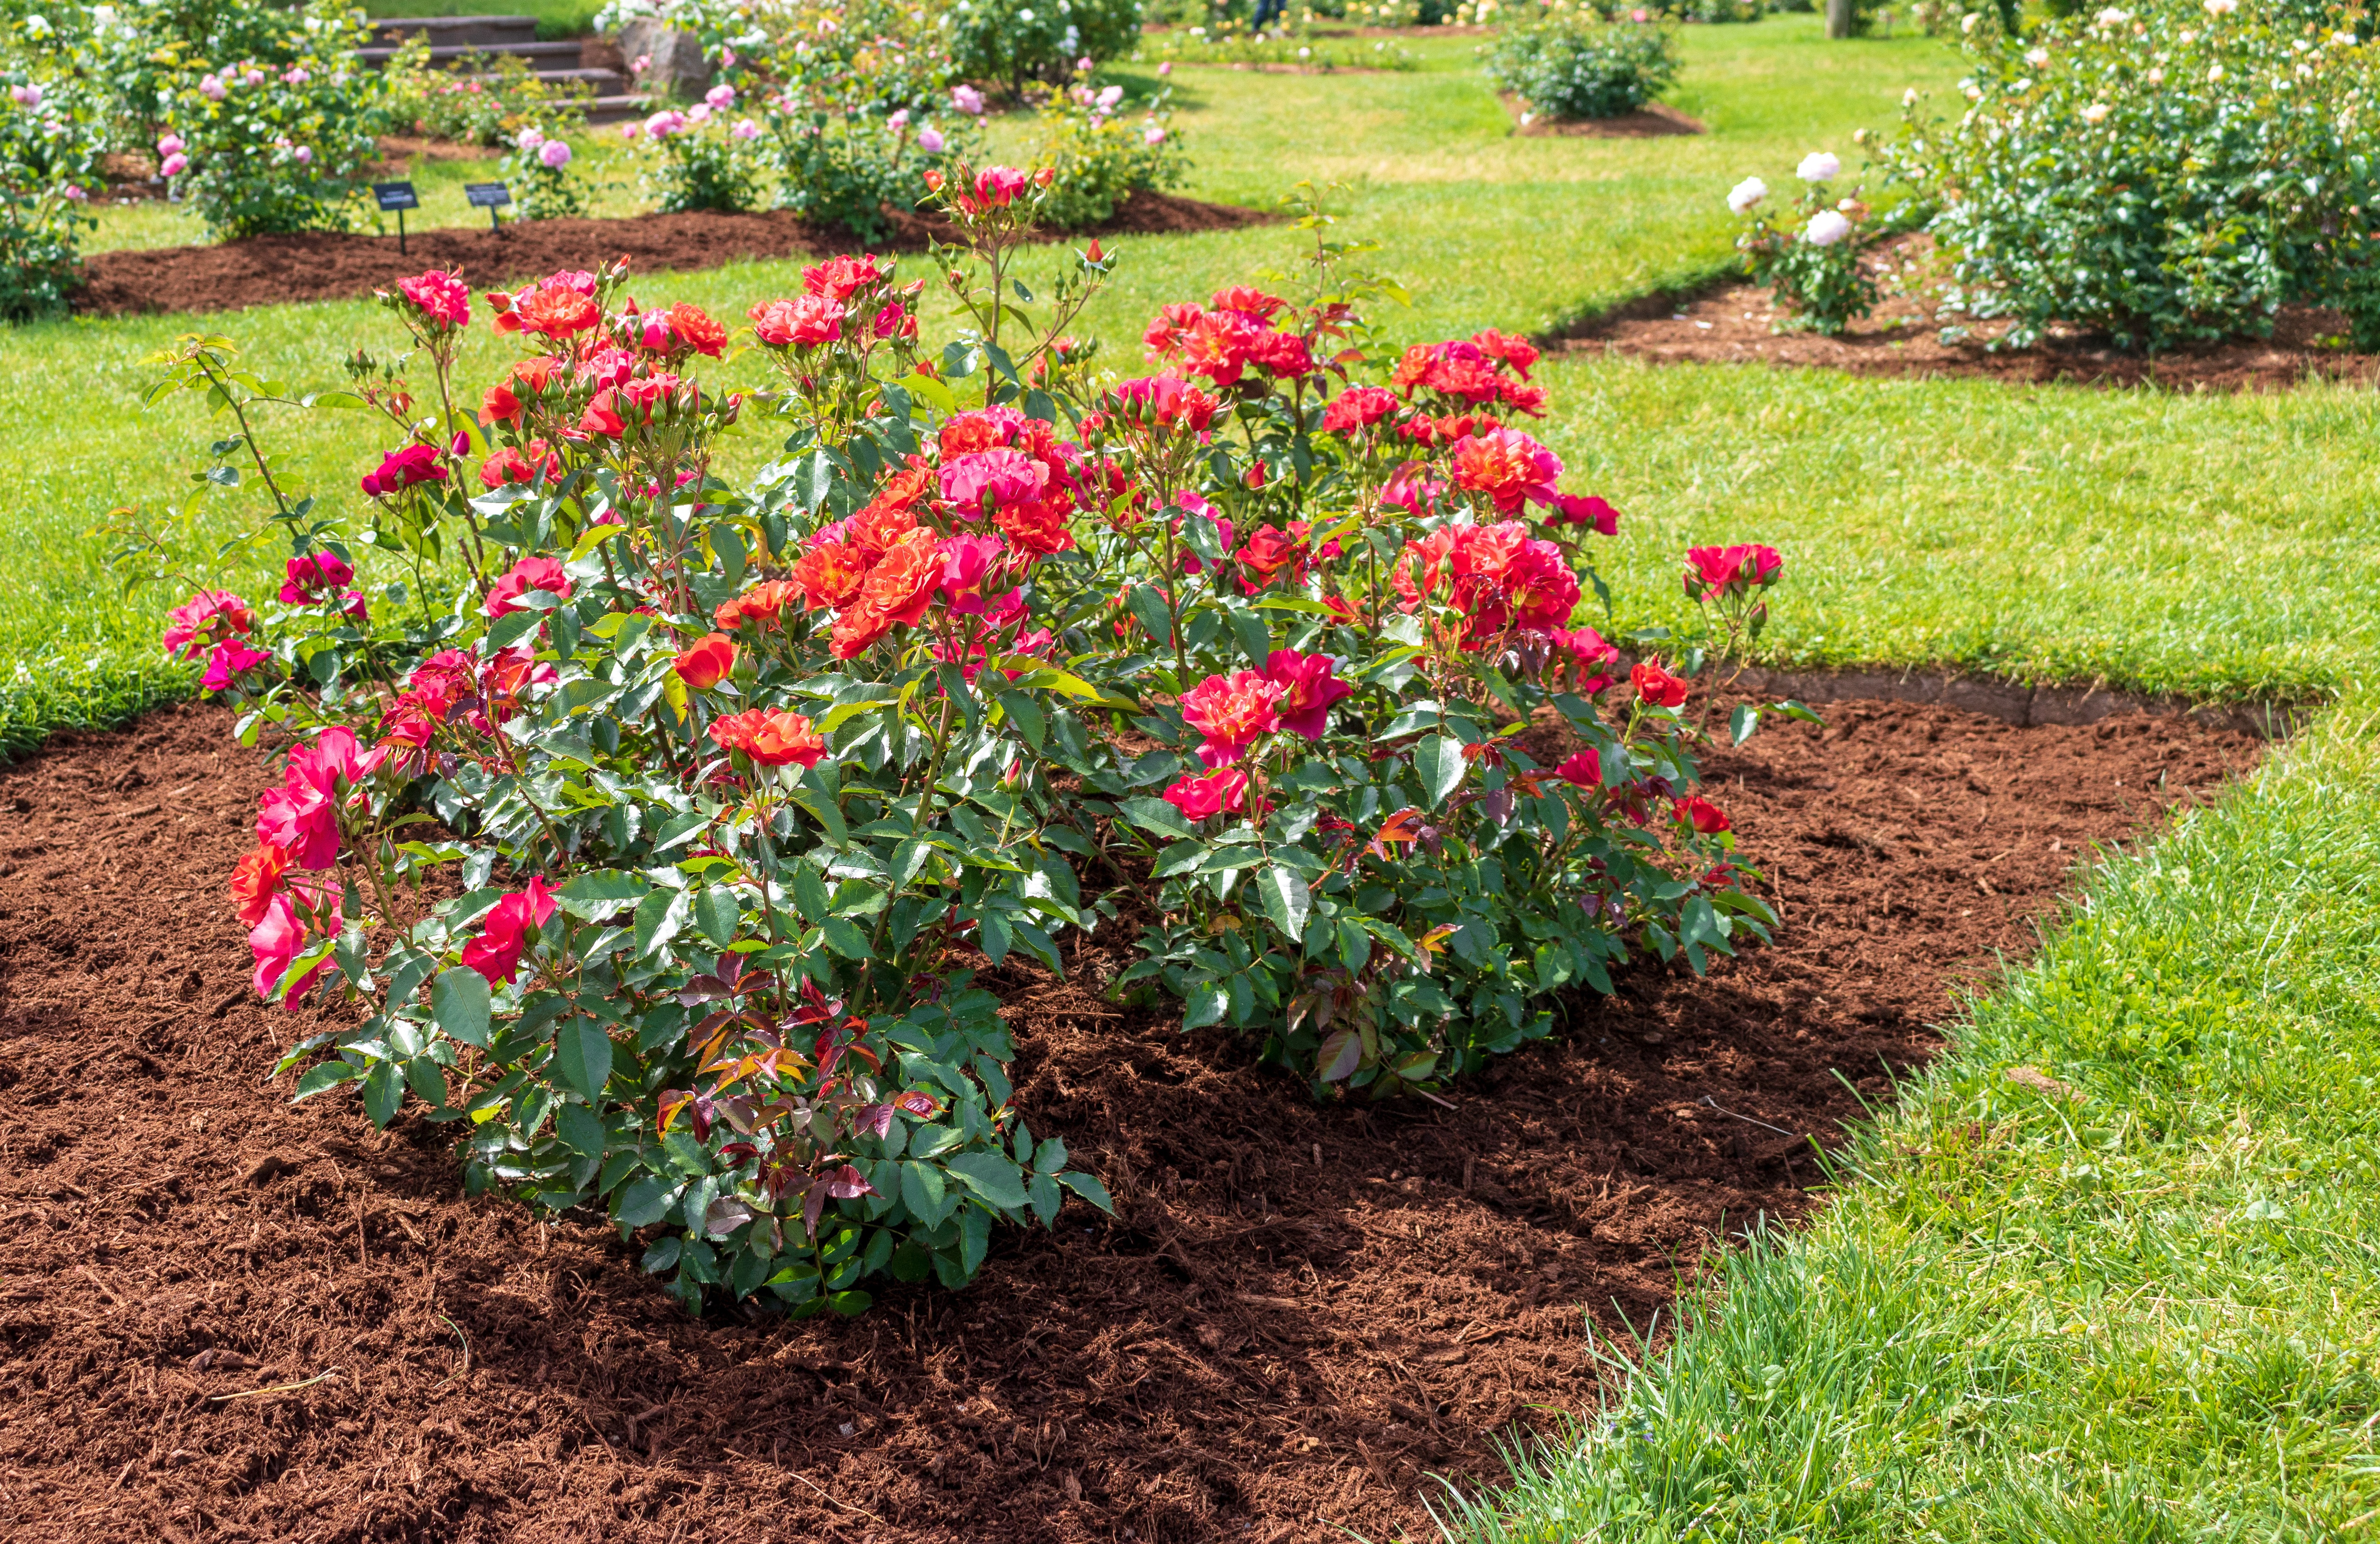 "Cinco de Mayo" rose blooms in a mulched flower bed